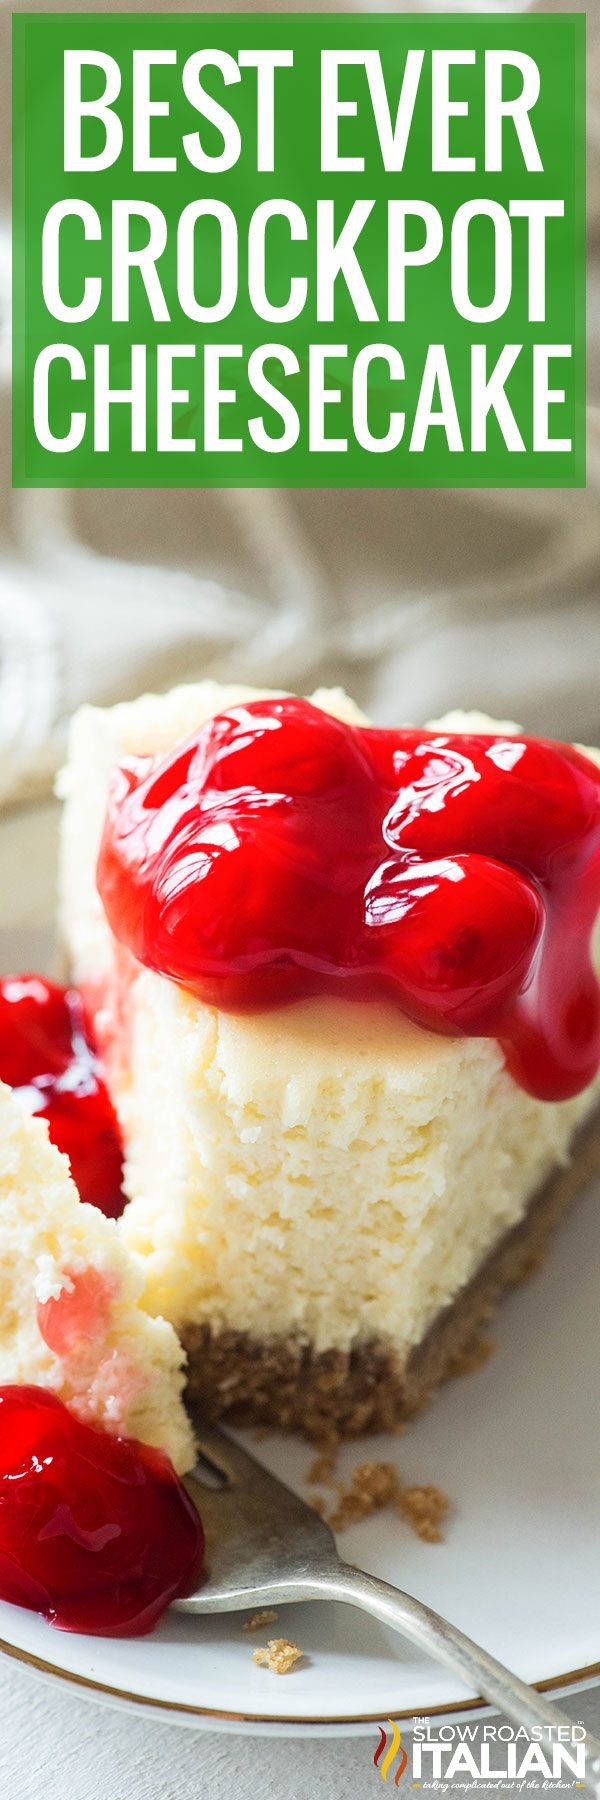 titled image for best ever crockpot cheesecake